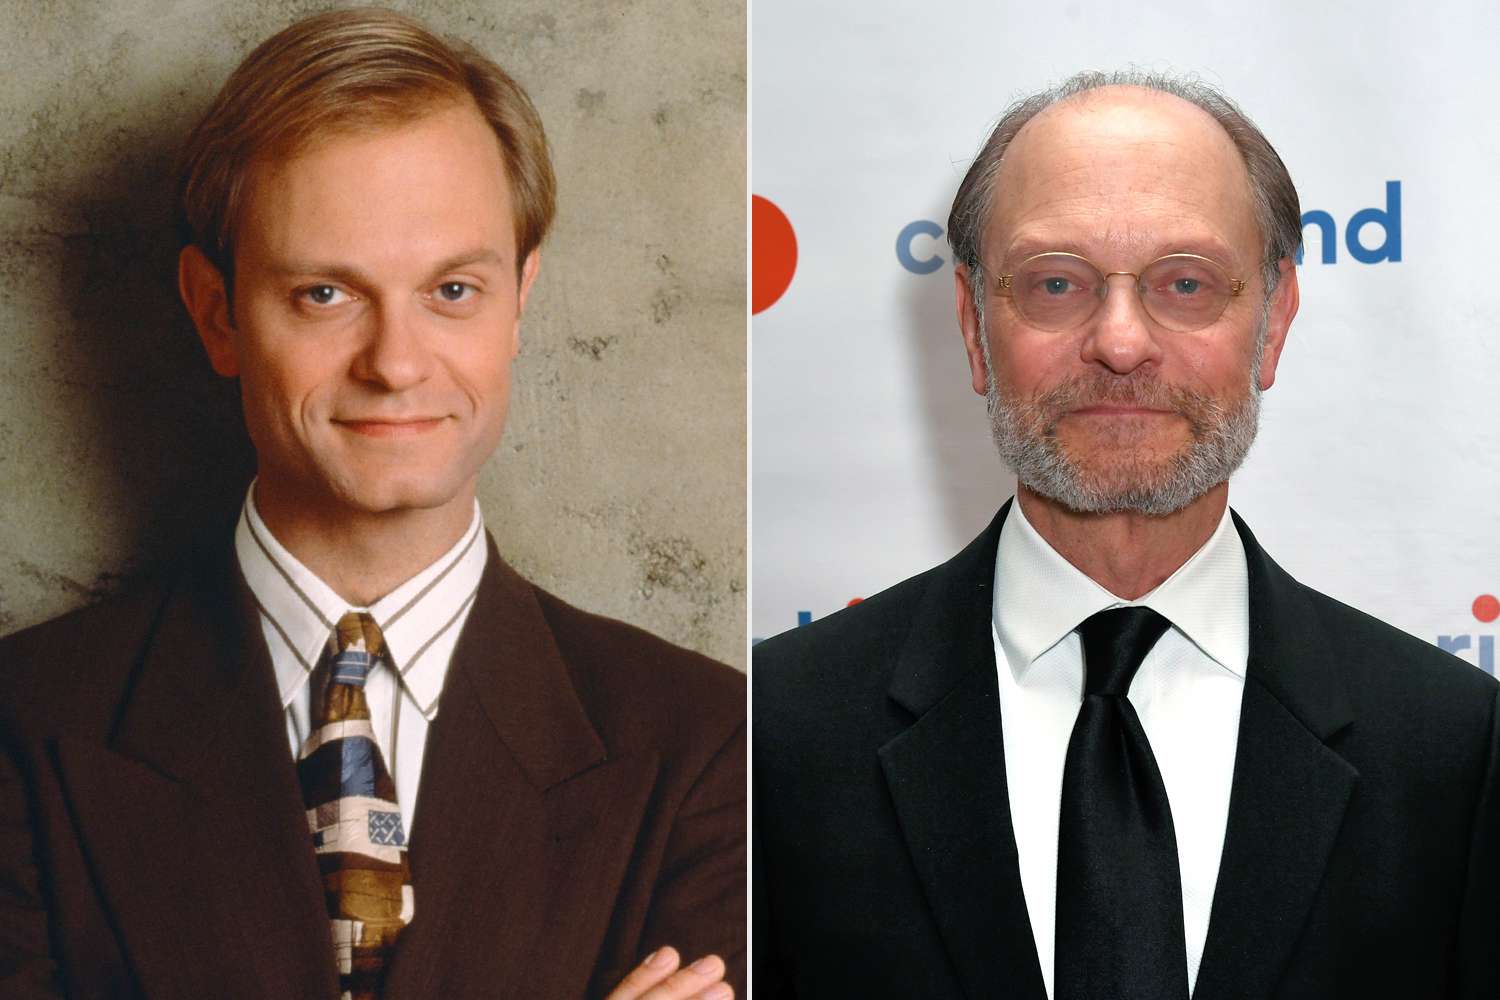 FRASIER -- Season 3 -- Pictured: David Hyde Pierce as Doctor Niles Crane ; David Hyde Pierce attends CaringKind's "Forget-Me-Not" 2022 Gala